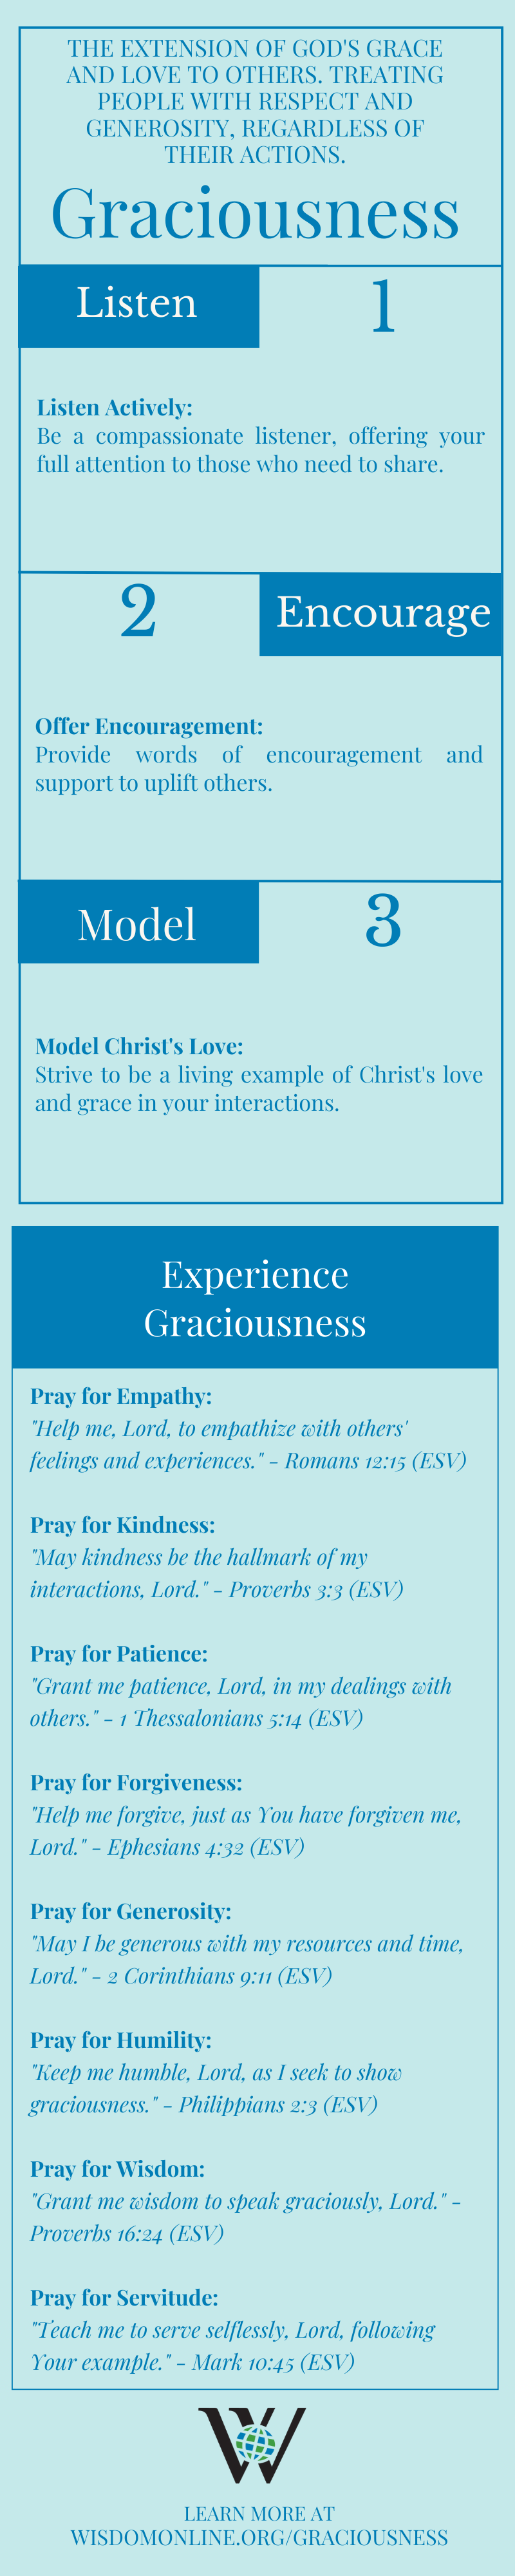 Infographic on the biblical quality of graciousness.